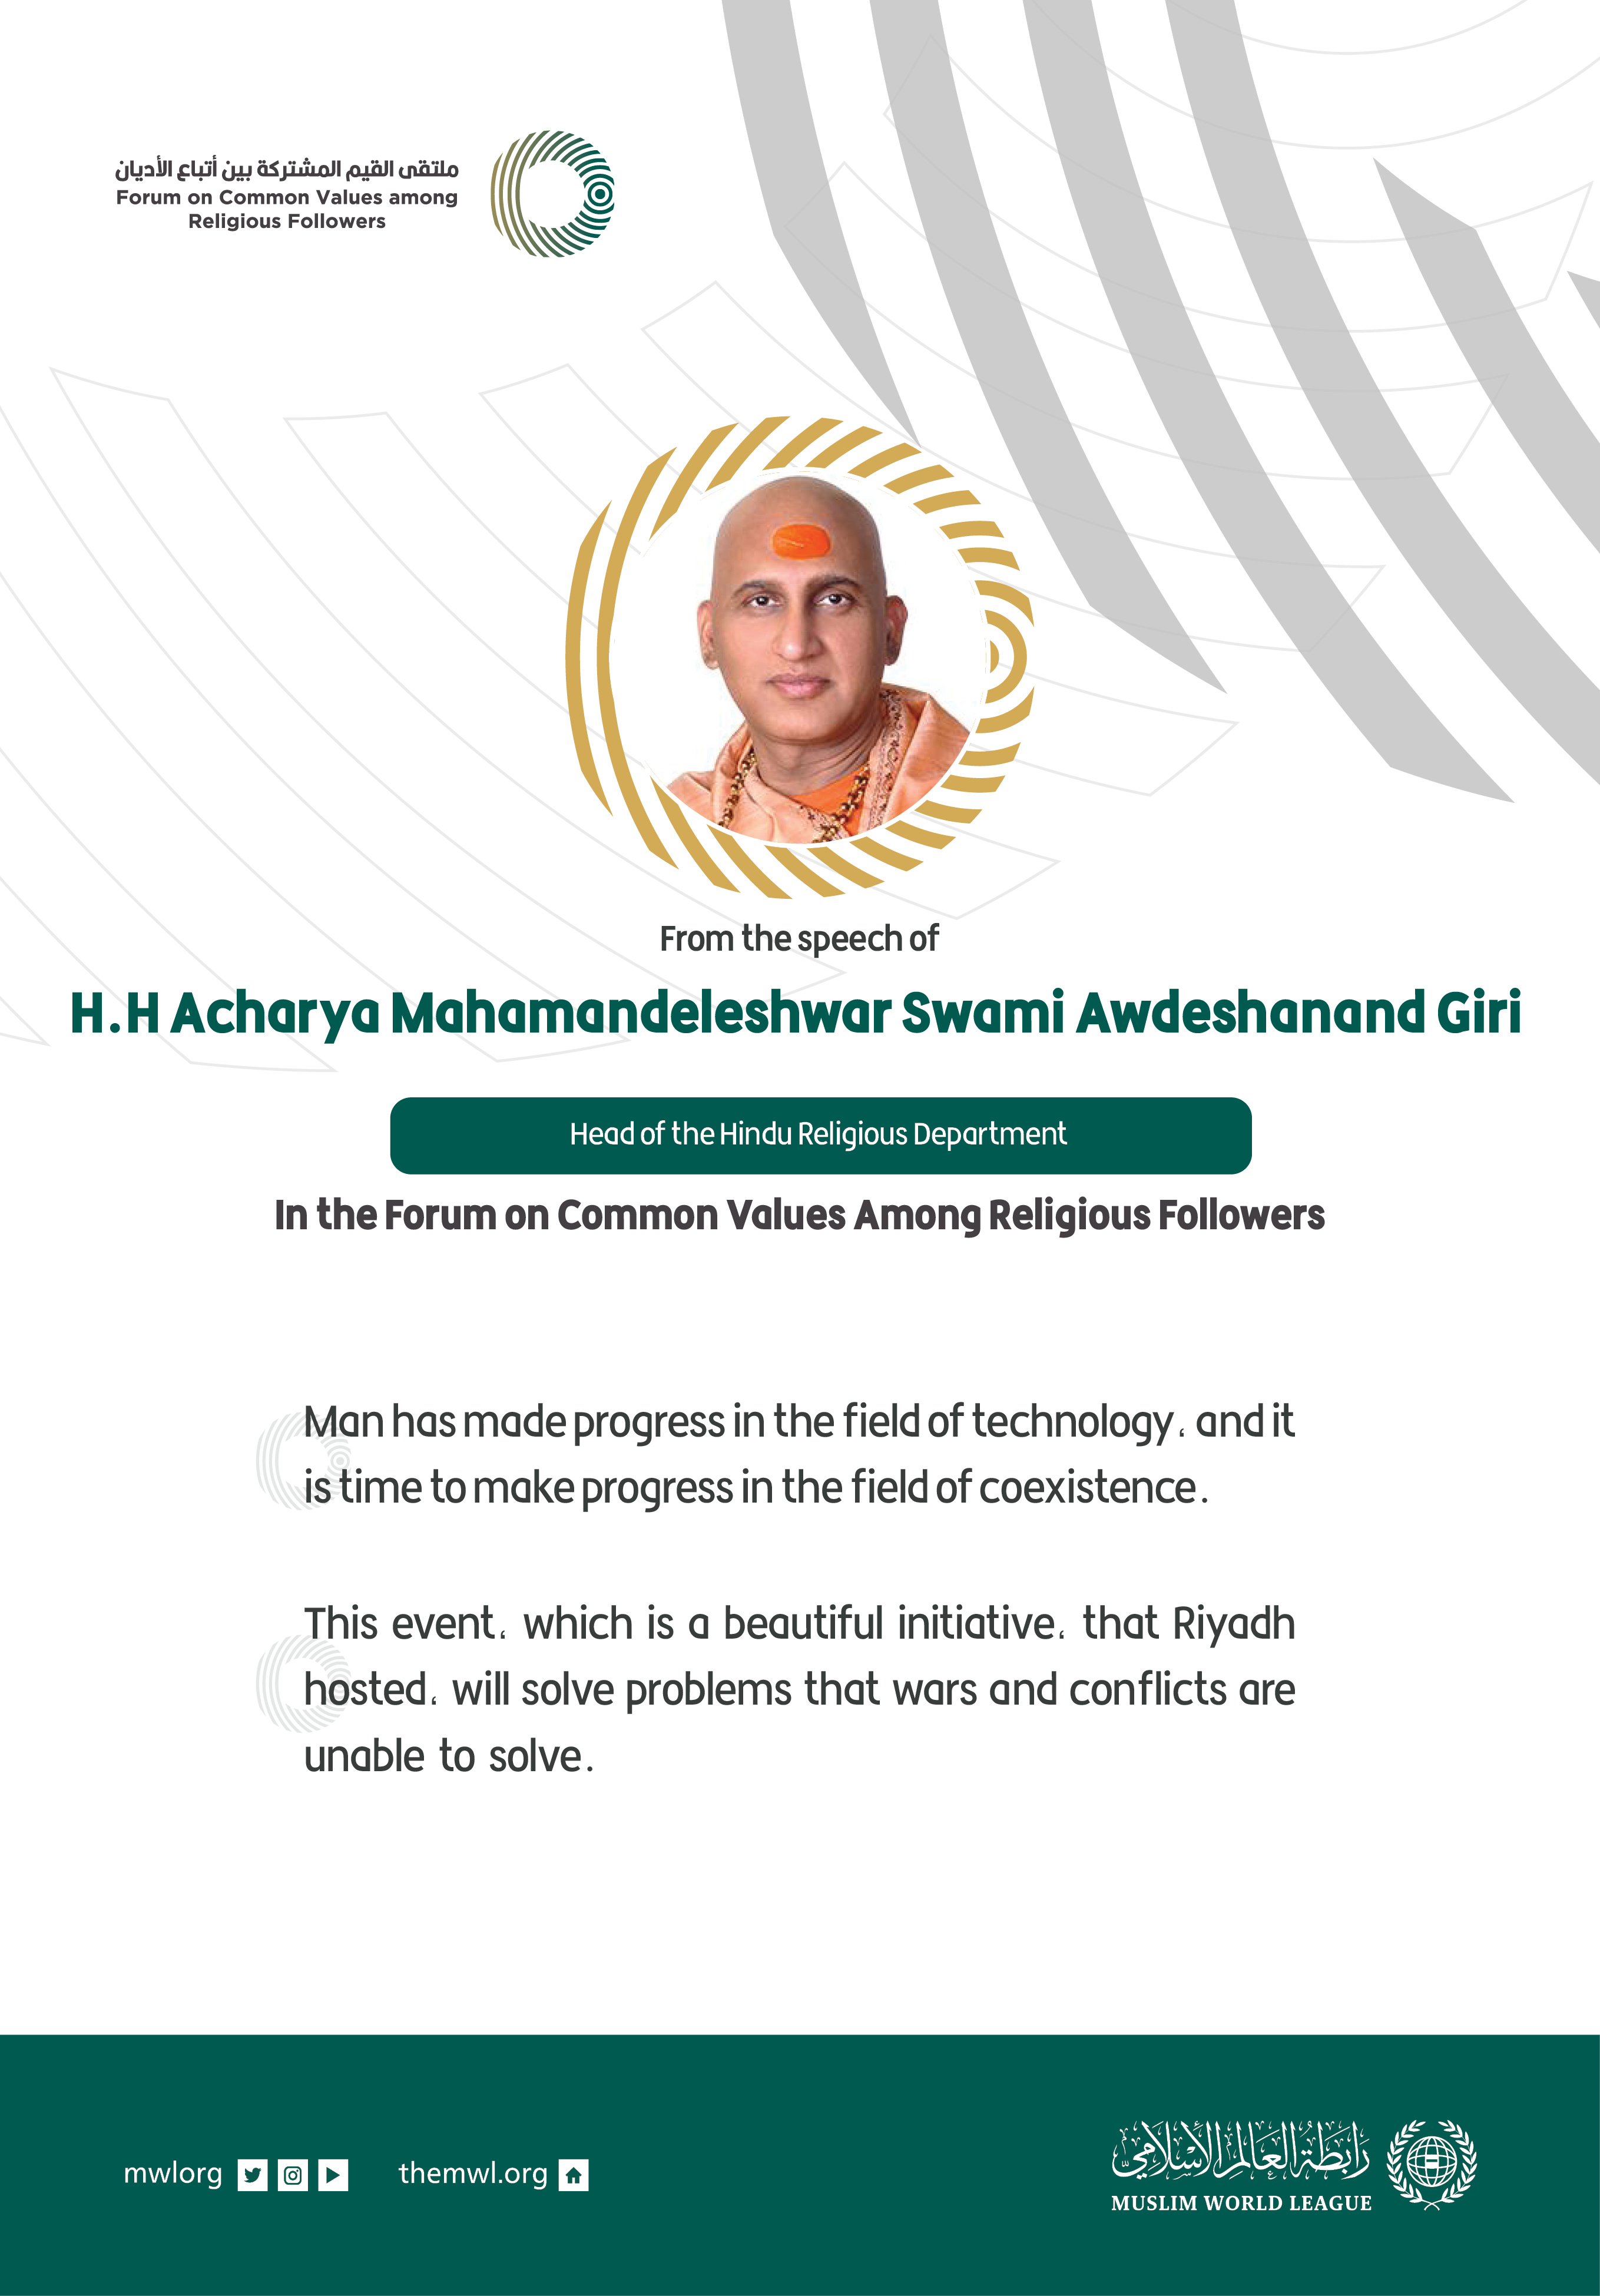 From the speech of the Head of the Hindu Religious Department, H.H Acharya Mahamandeleshwar Swami Awdeshanand Giri, in the Forum on Common Values Among Religious Followers in Riyadh: 